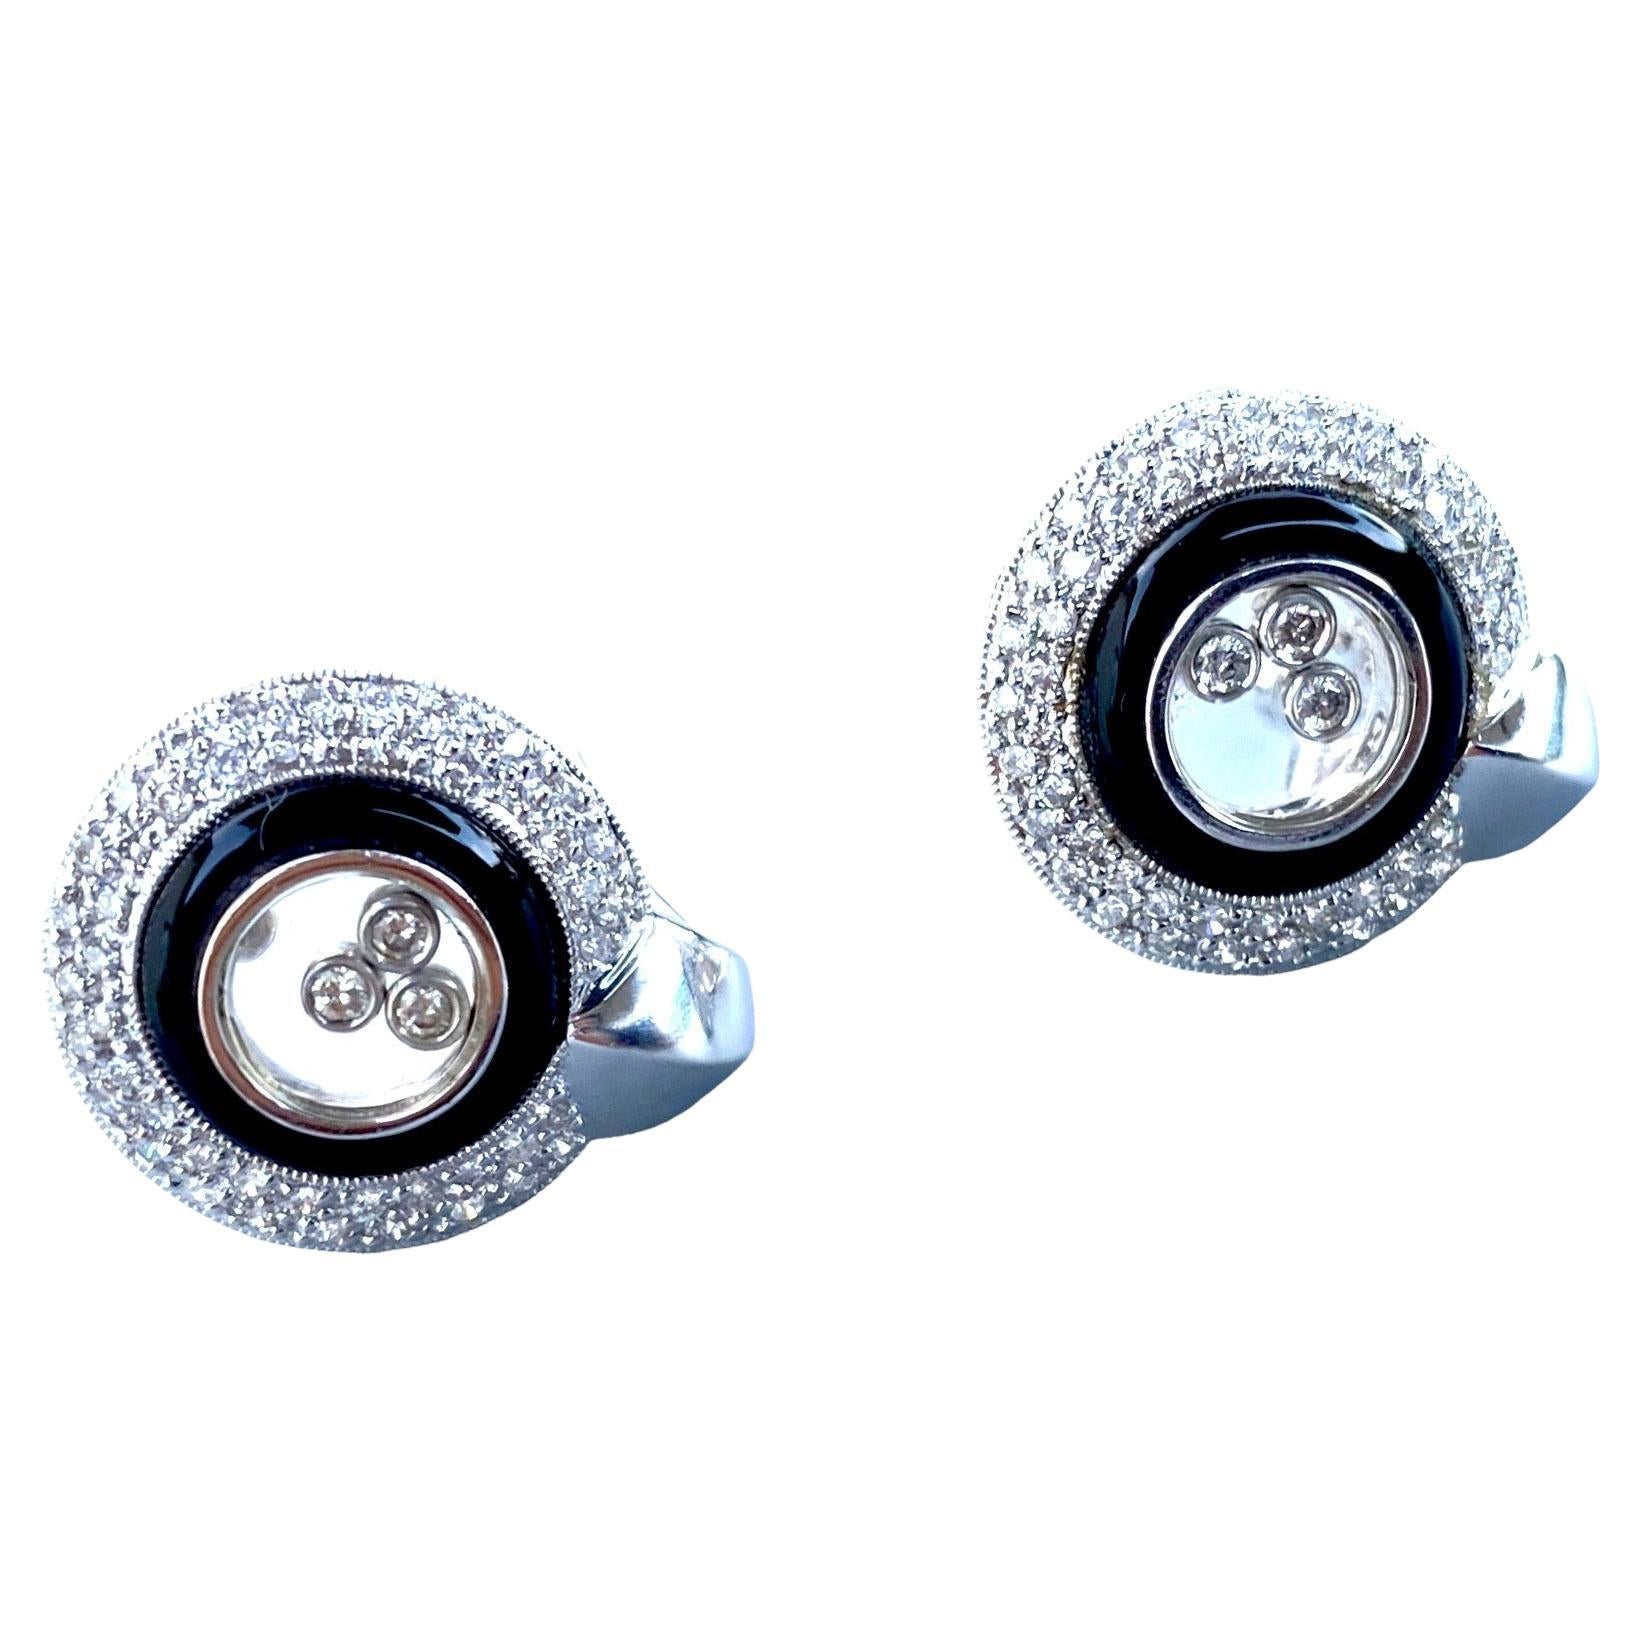 14K White Gold Happy Diamonds and Black Onyx Earrings .80 Carats